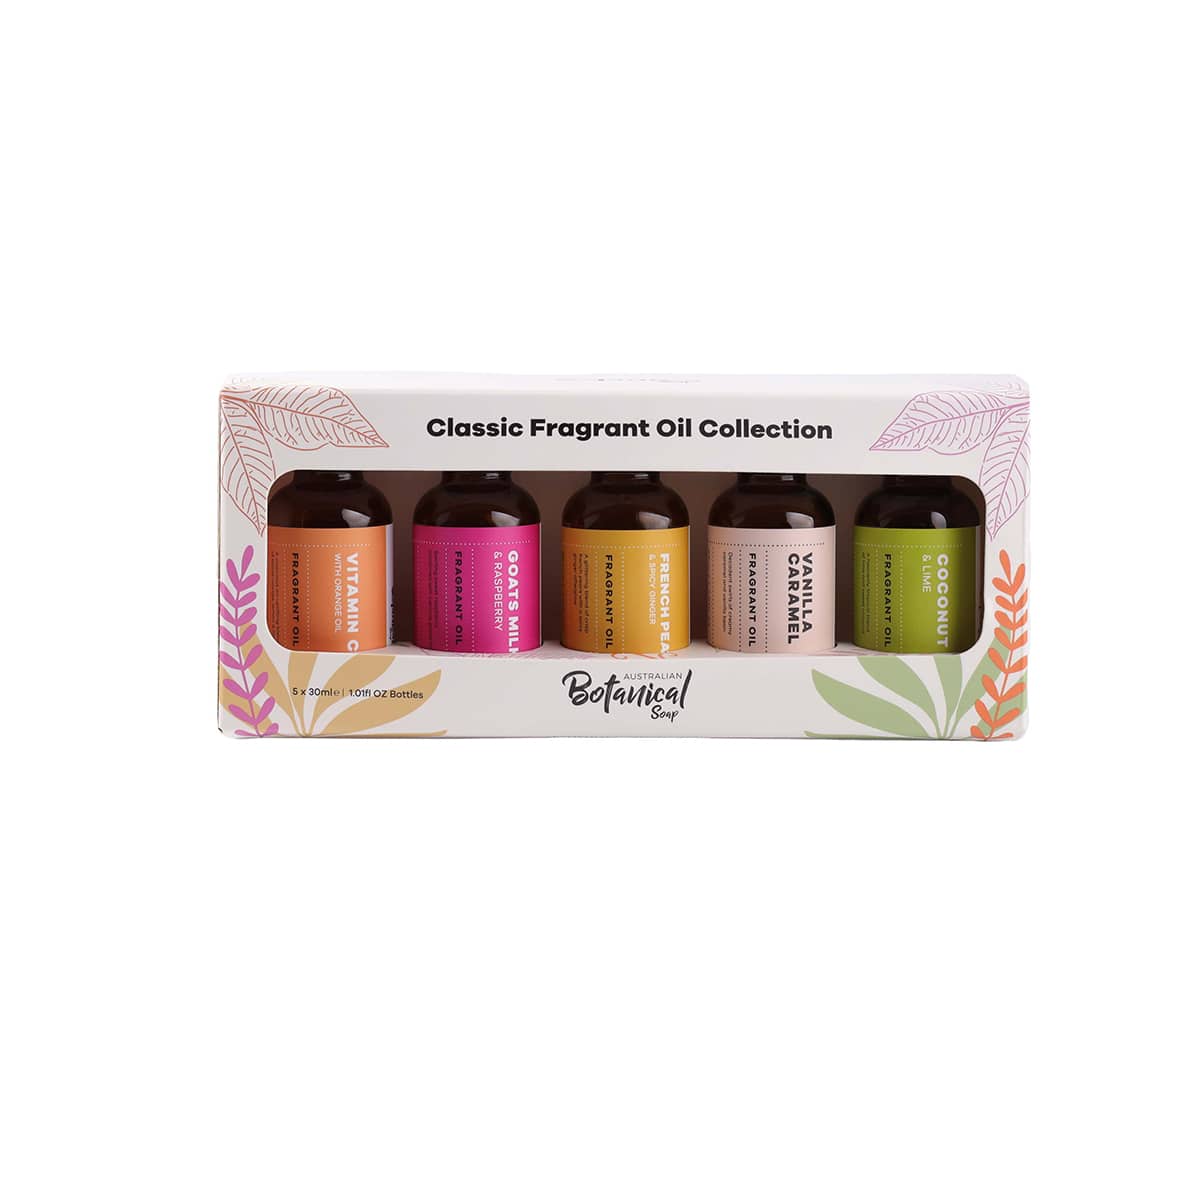 Classic Fragrant Oil Collection x 5 Pack